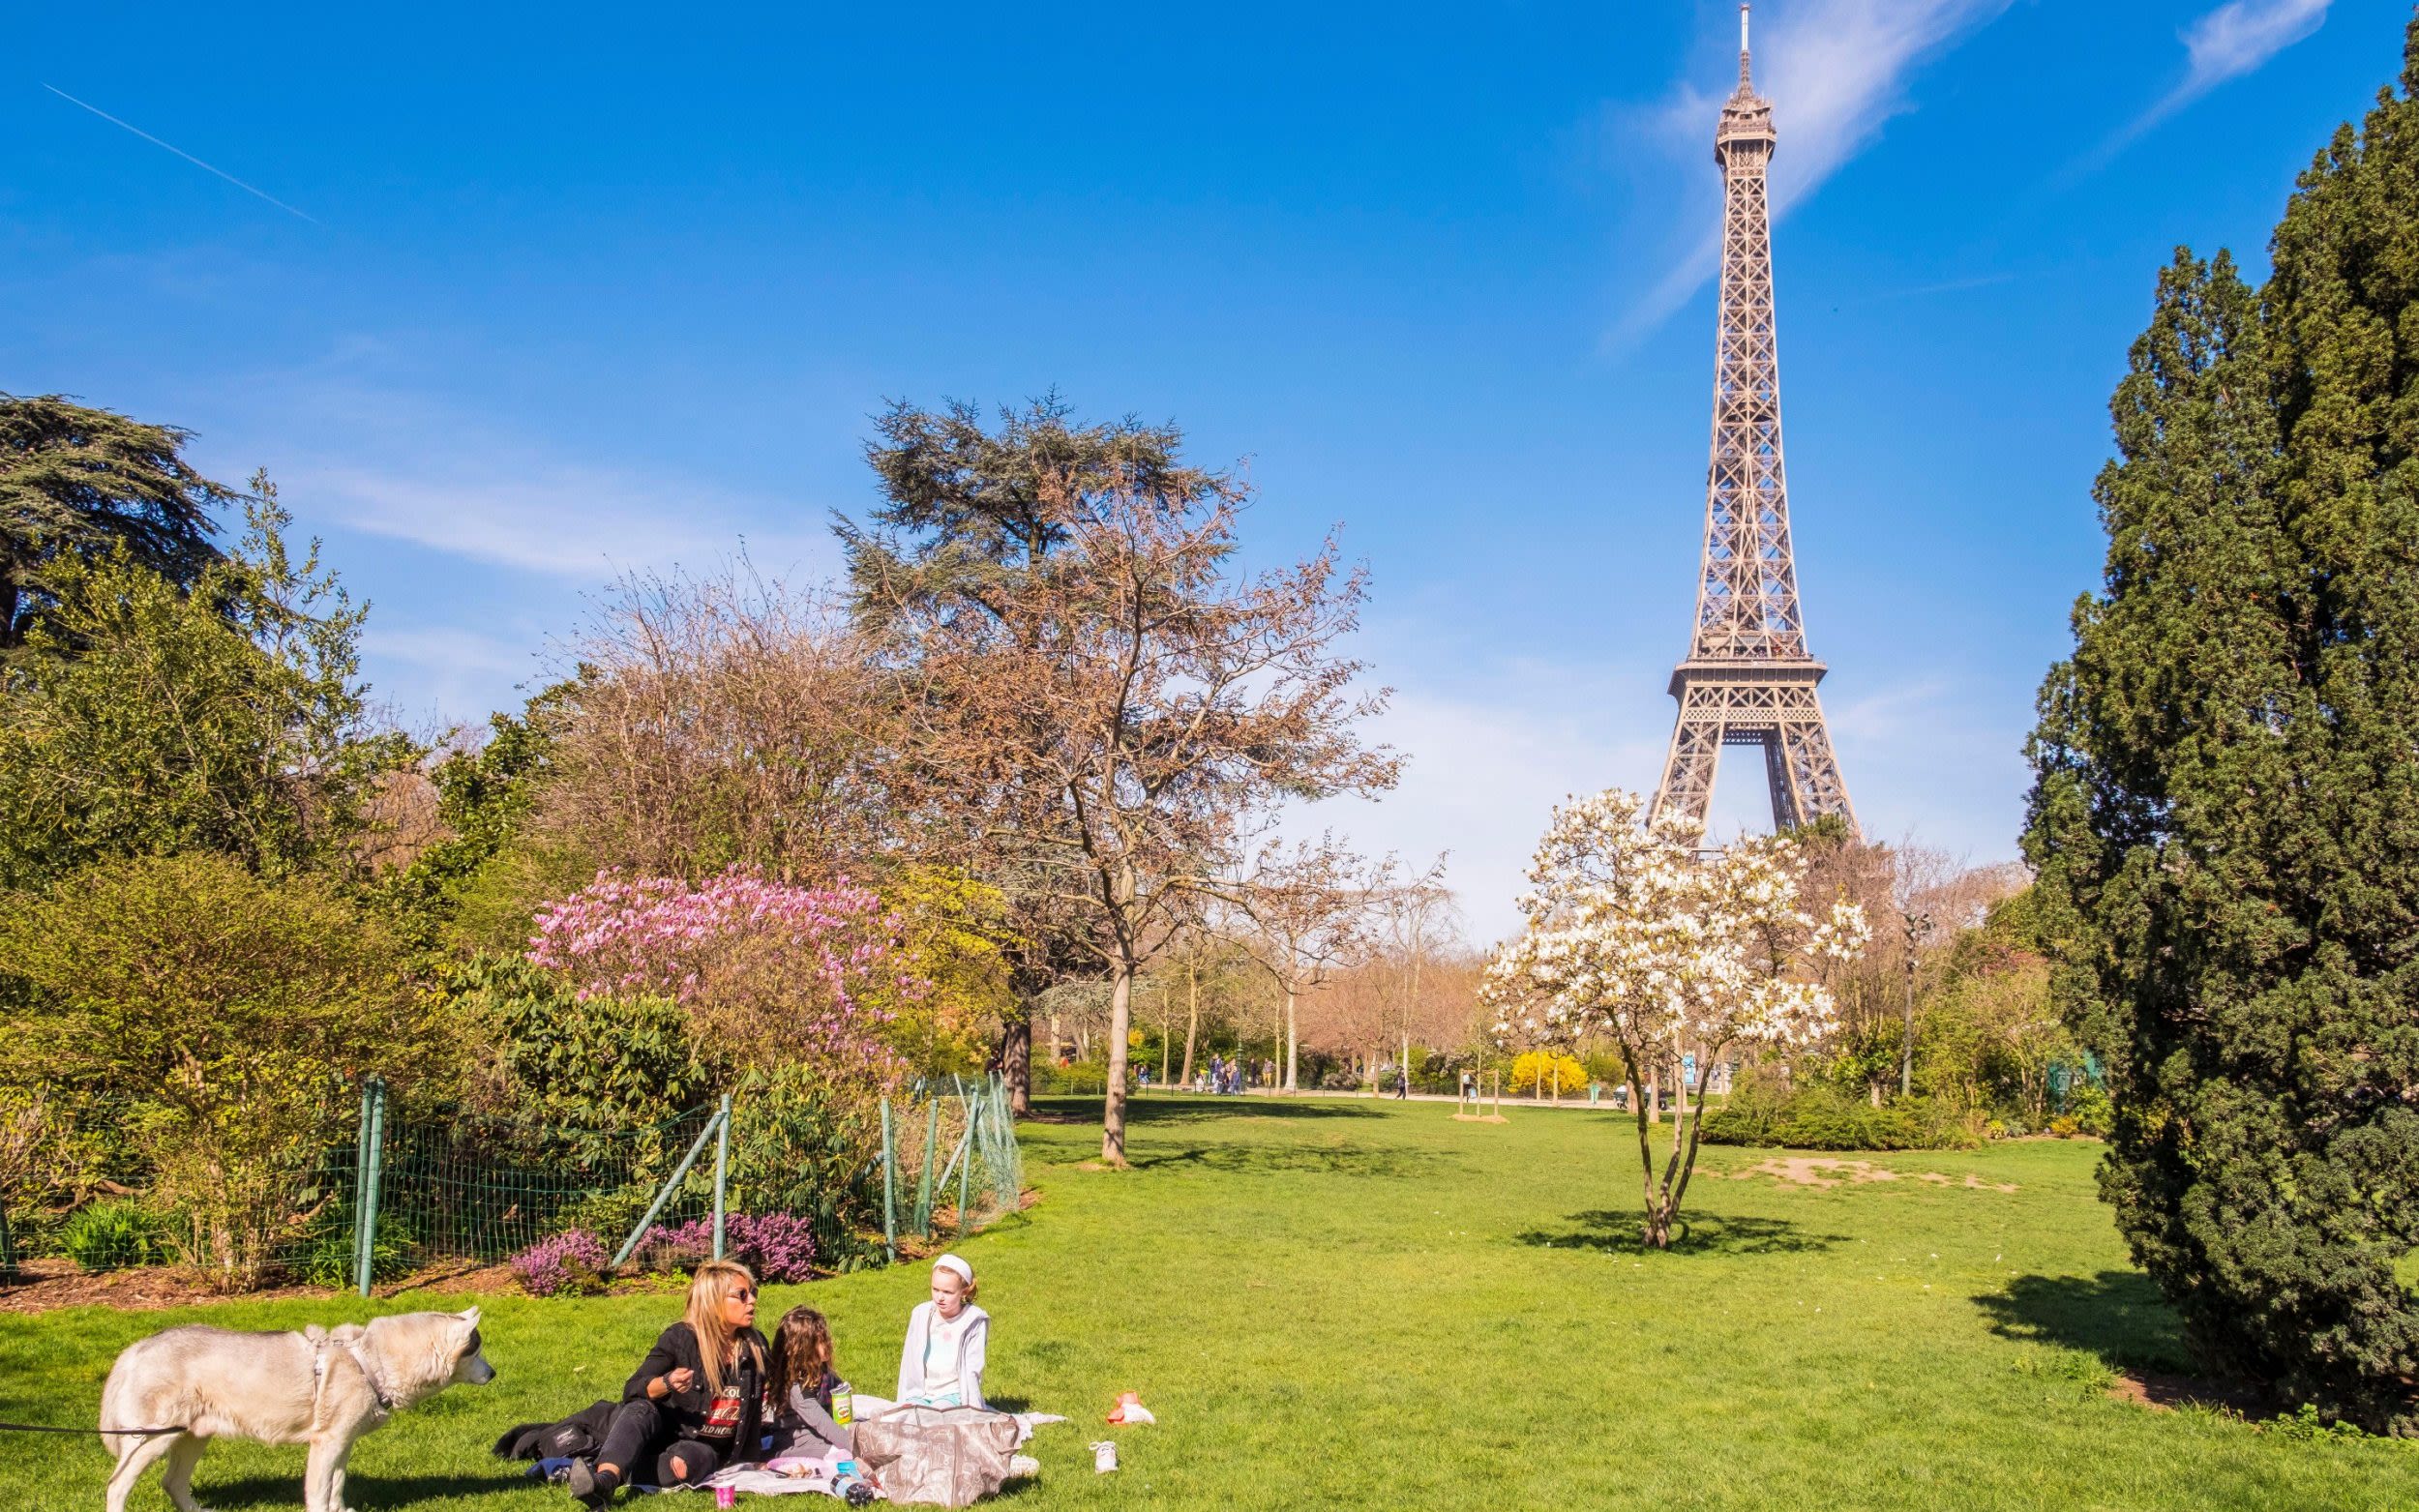 An insider’s guide to the Eiffel Tower, by someone who has been there 100 times